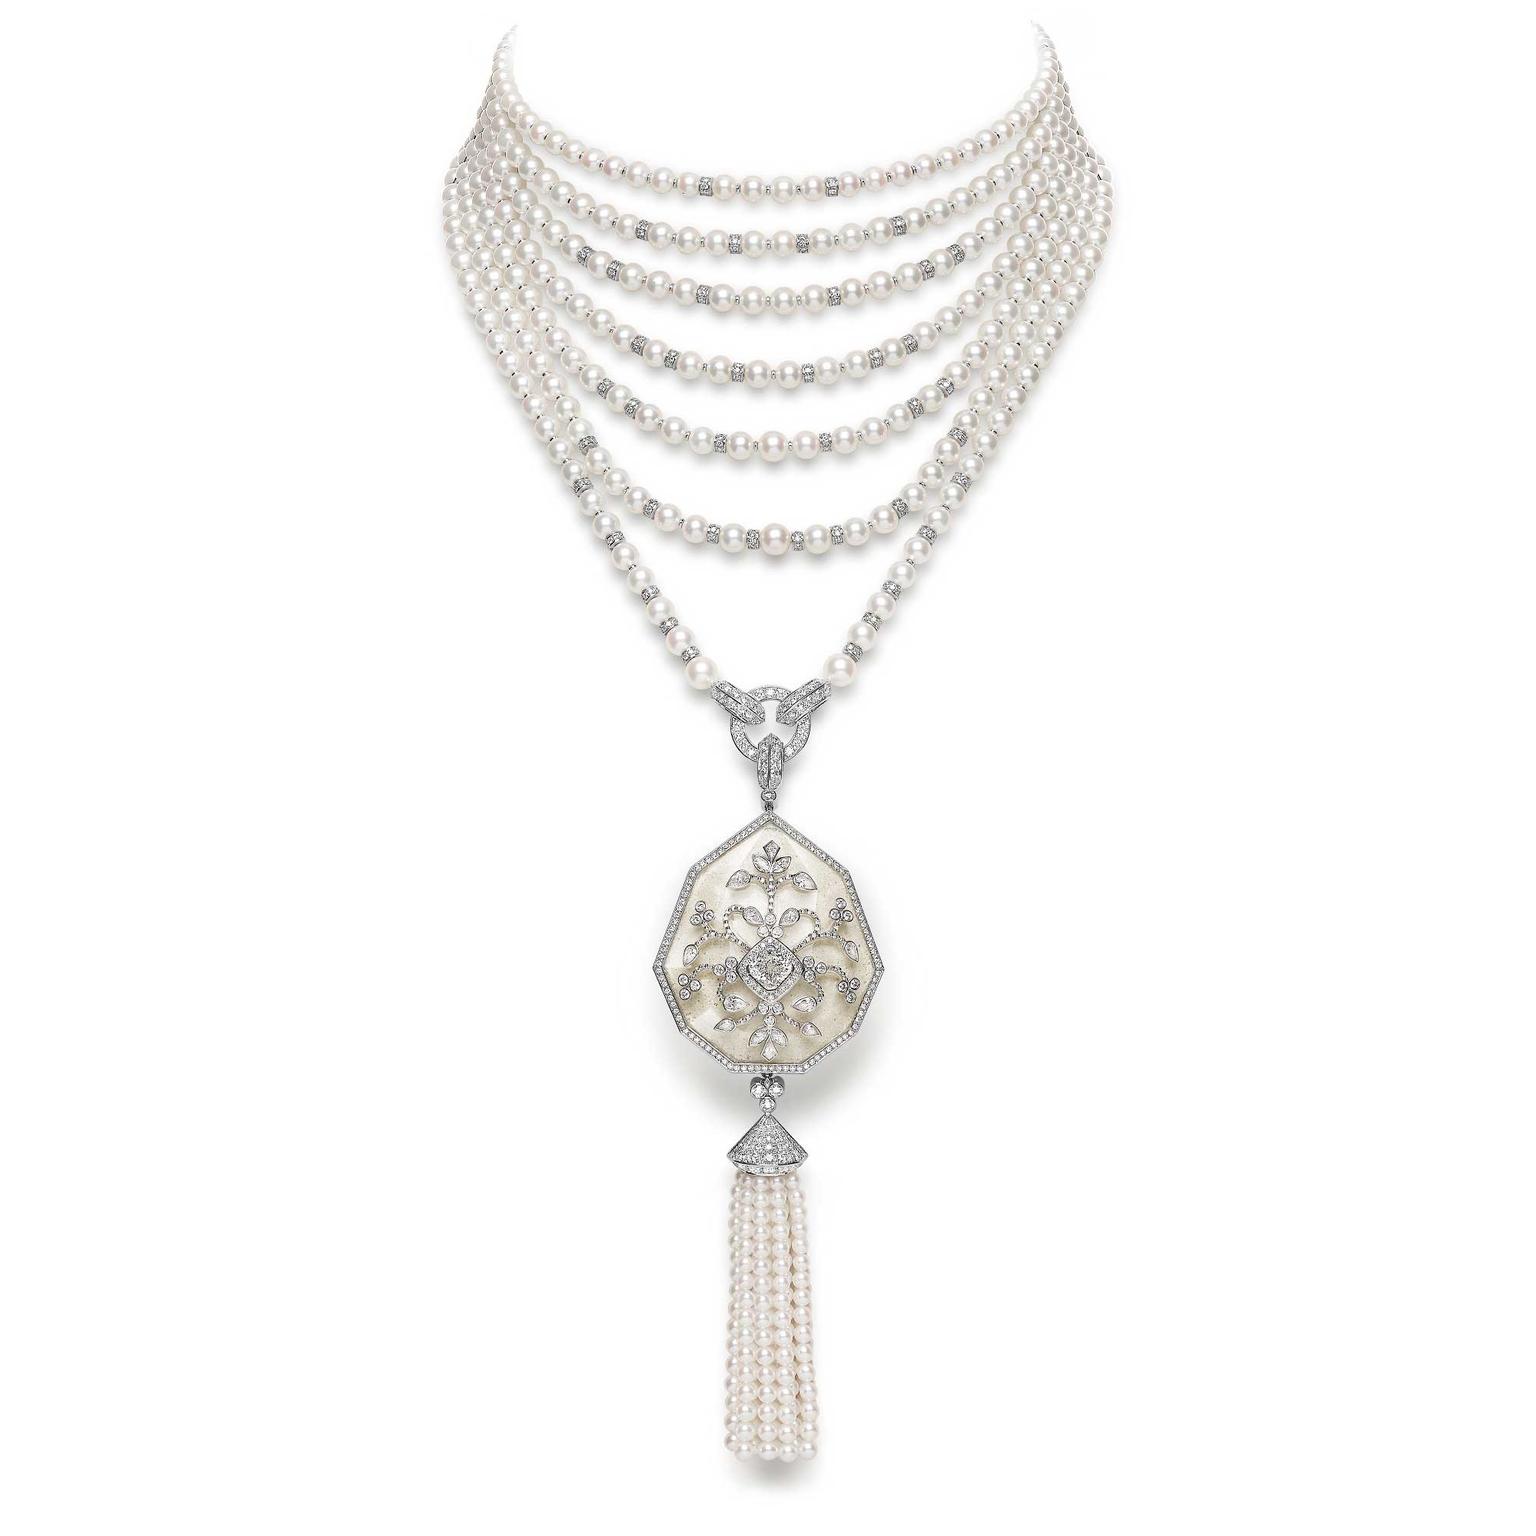 Boucheron Nagaur necklace with pearls and rock crystal